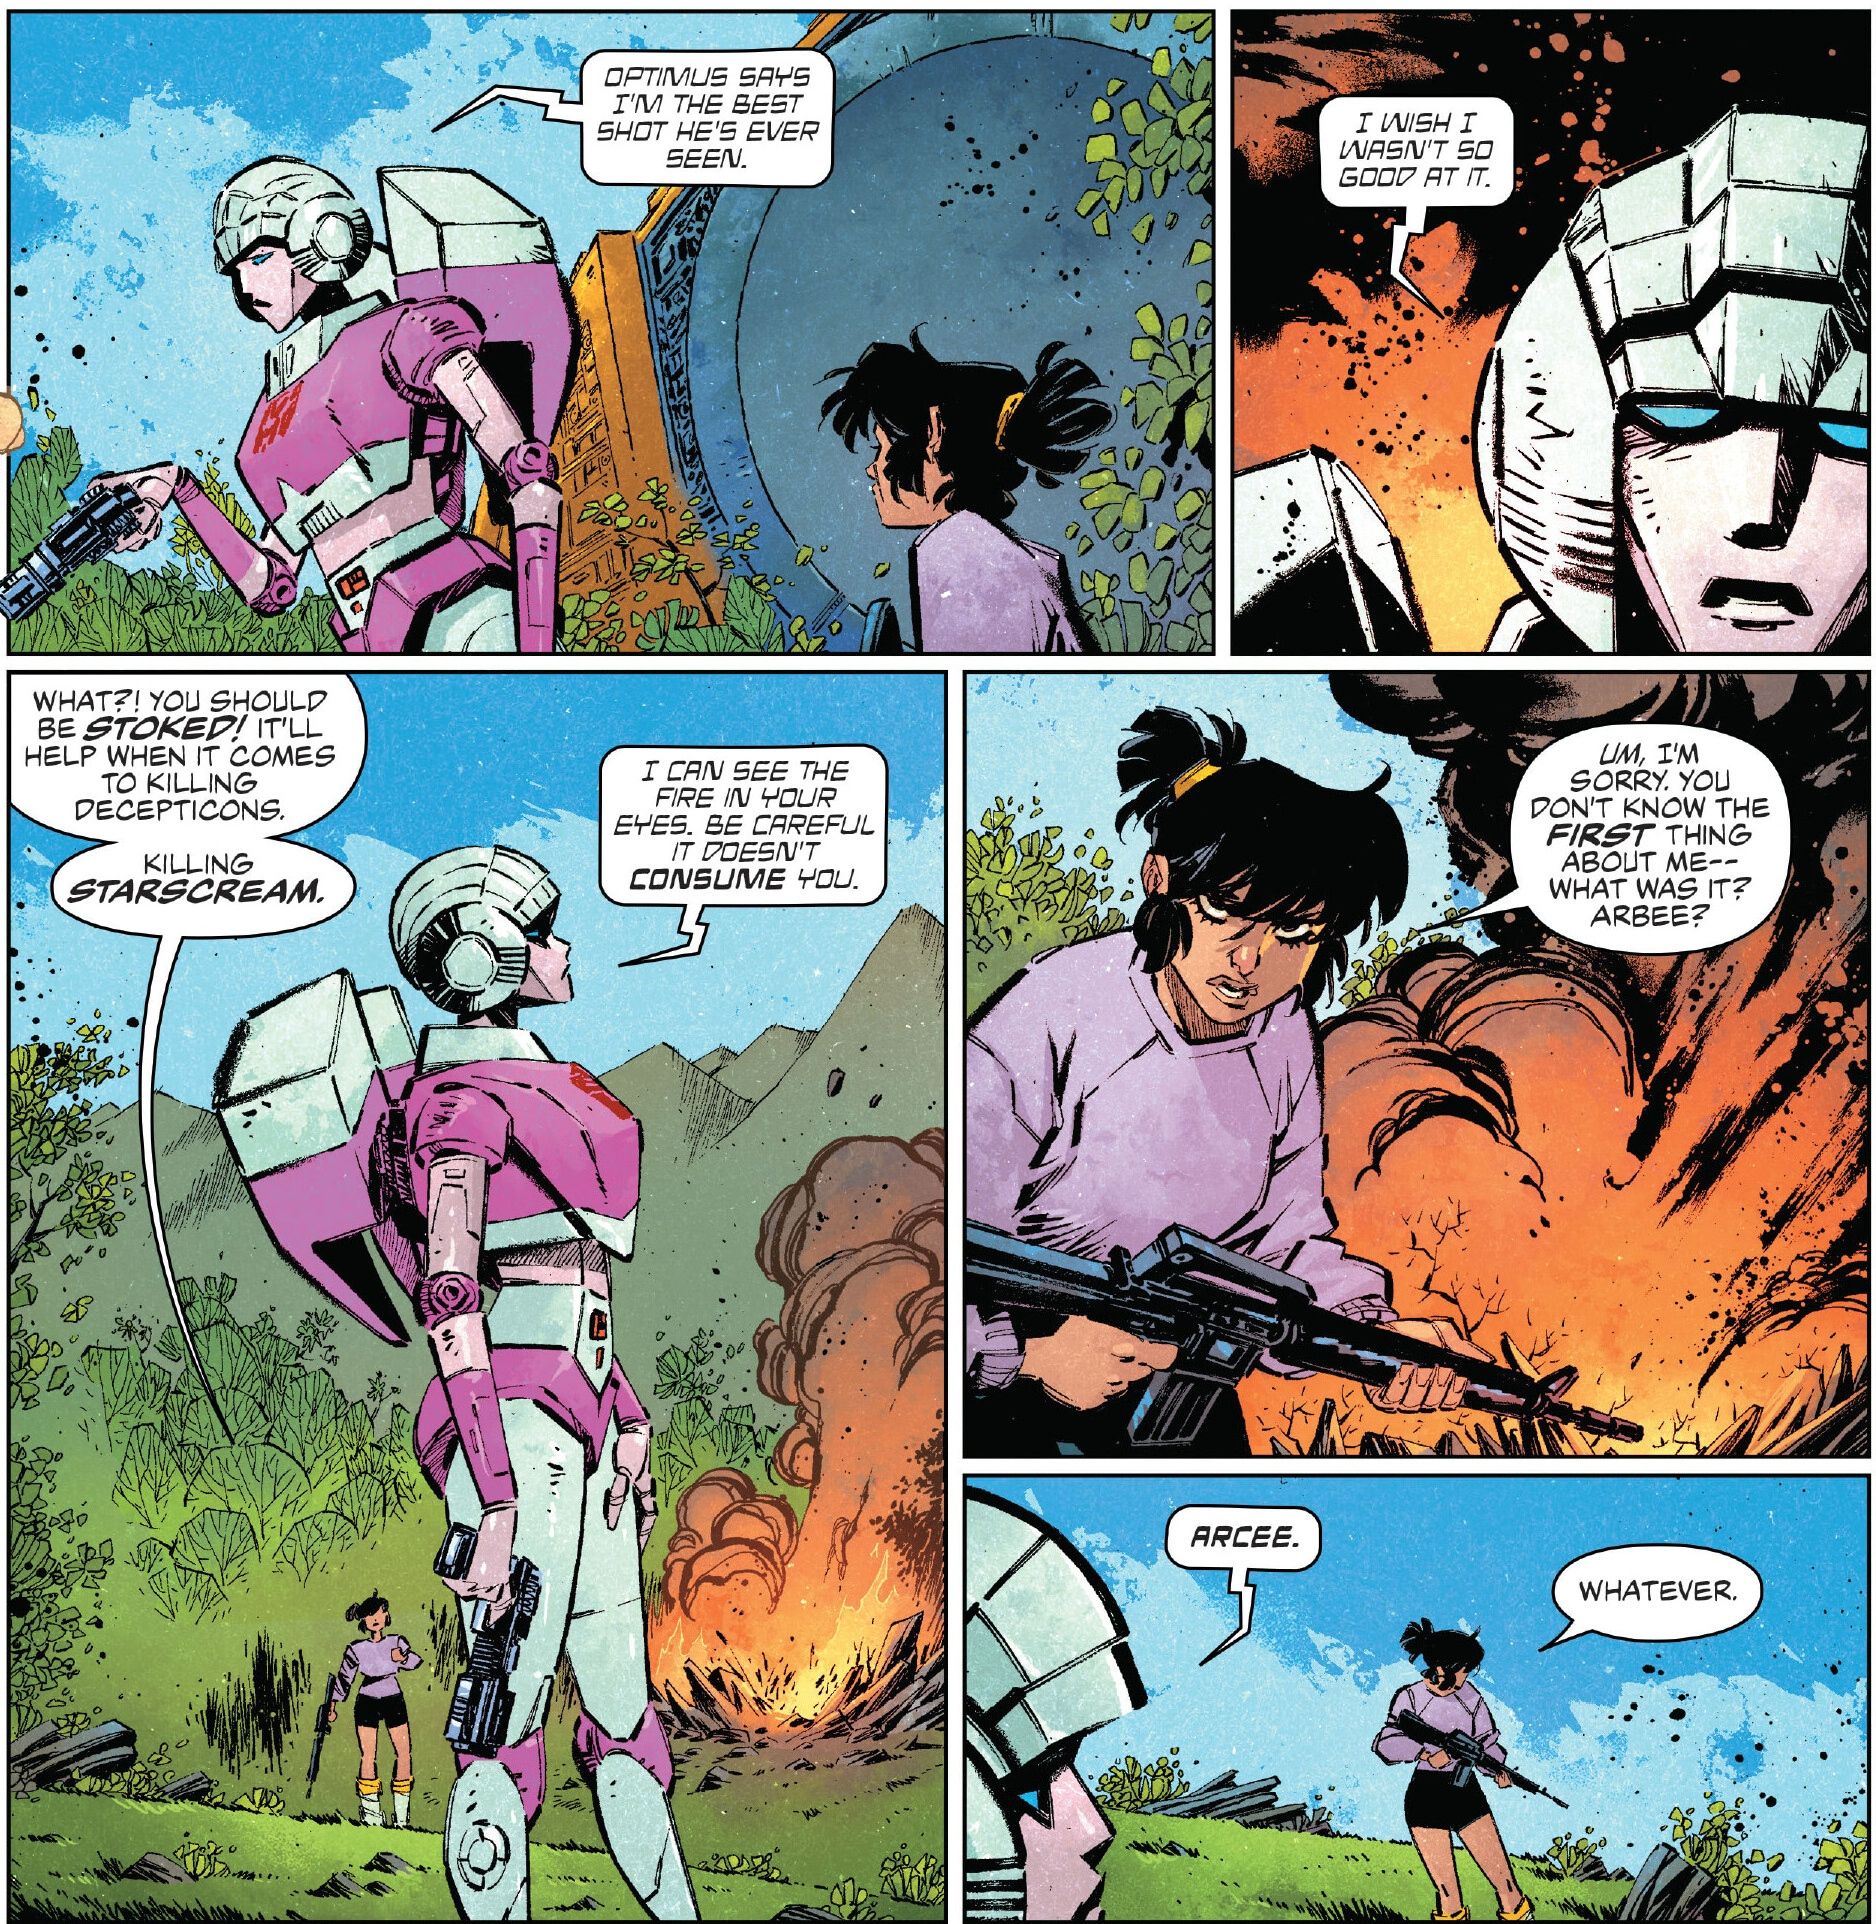 Transformers #7 Arcee tells Carly about Optimus Prime